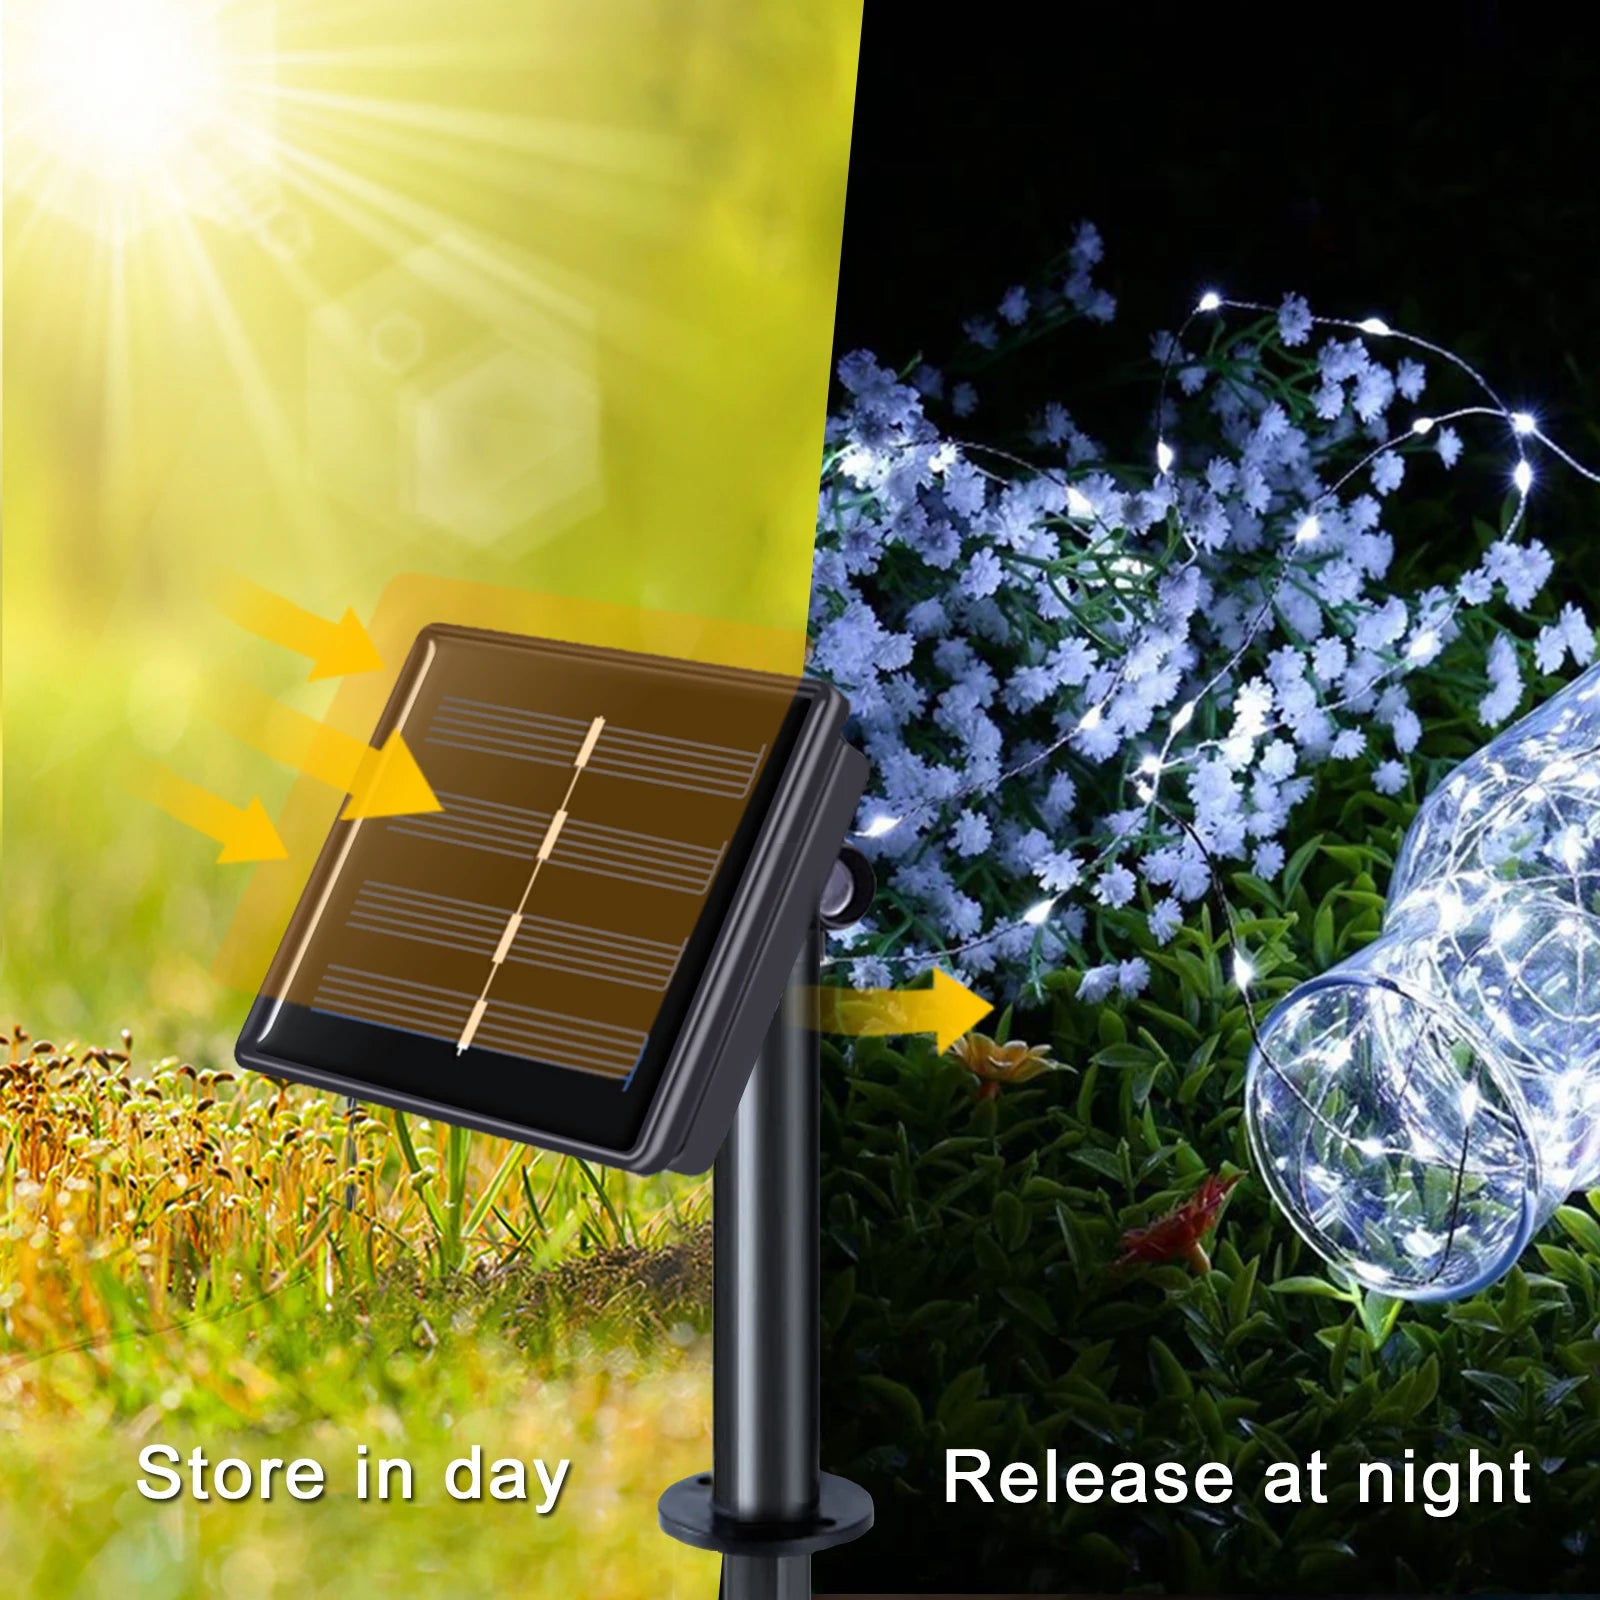 Stores energy during the day for bright illumination at night.